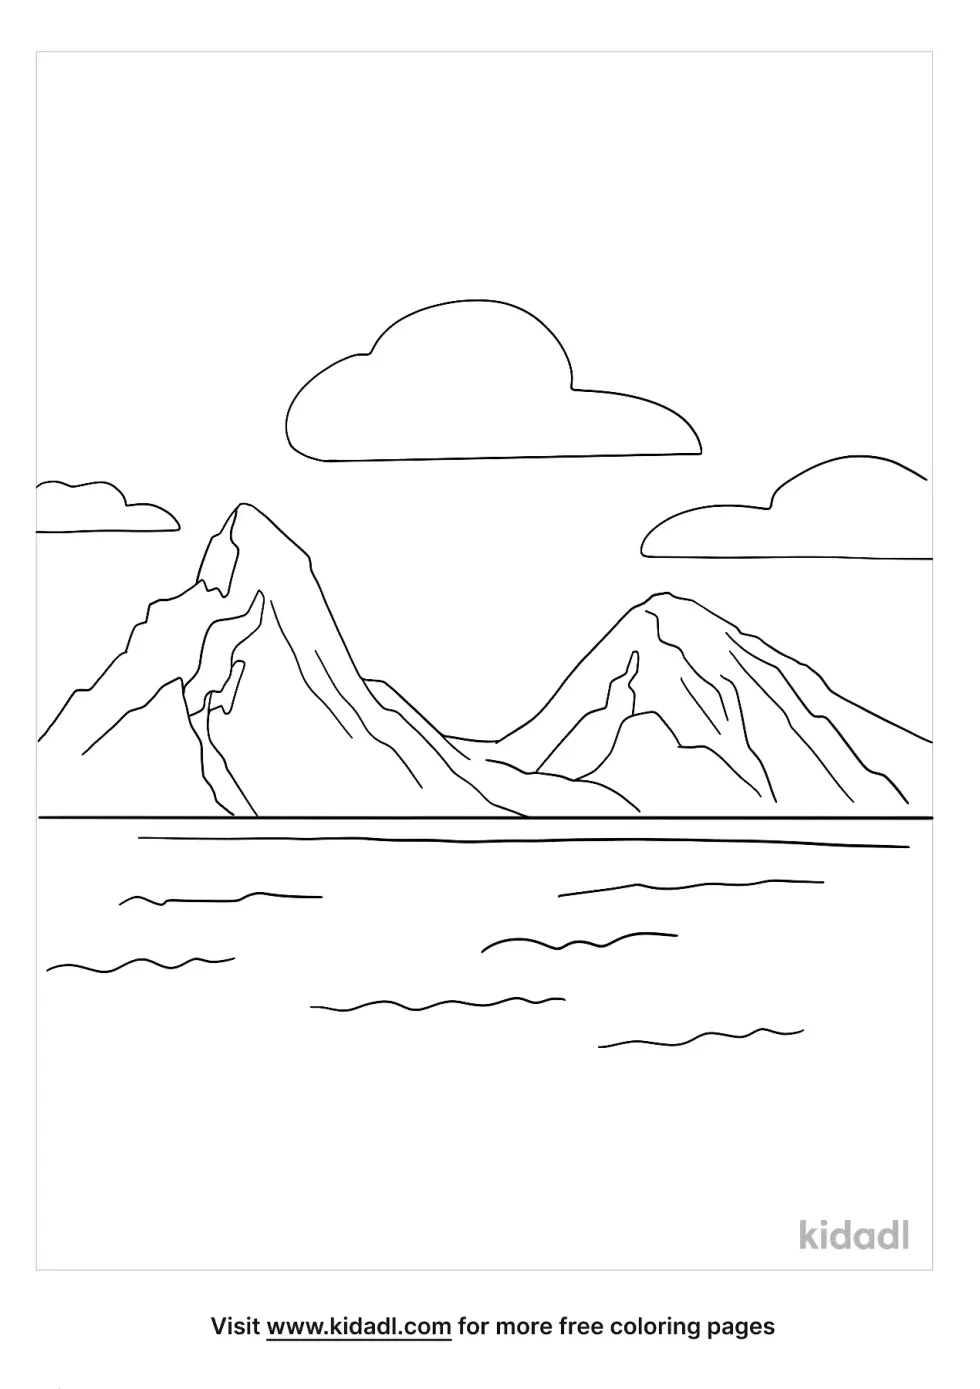 St Lucia Pitons Coloring Page